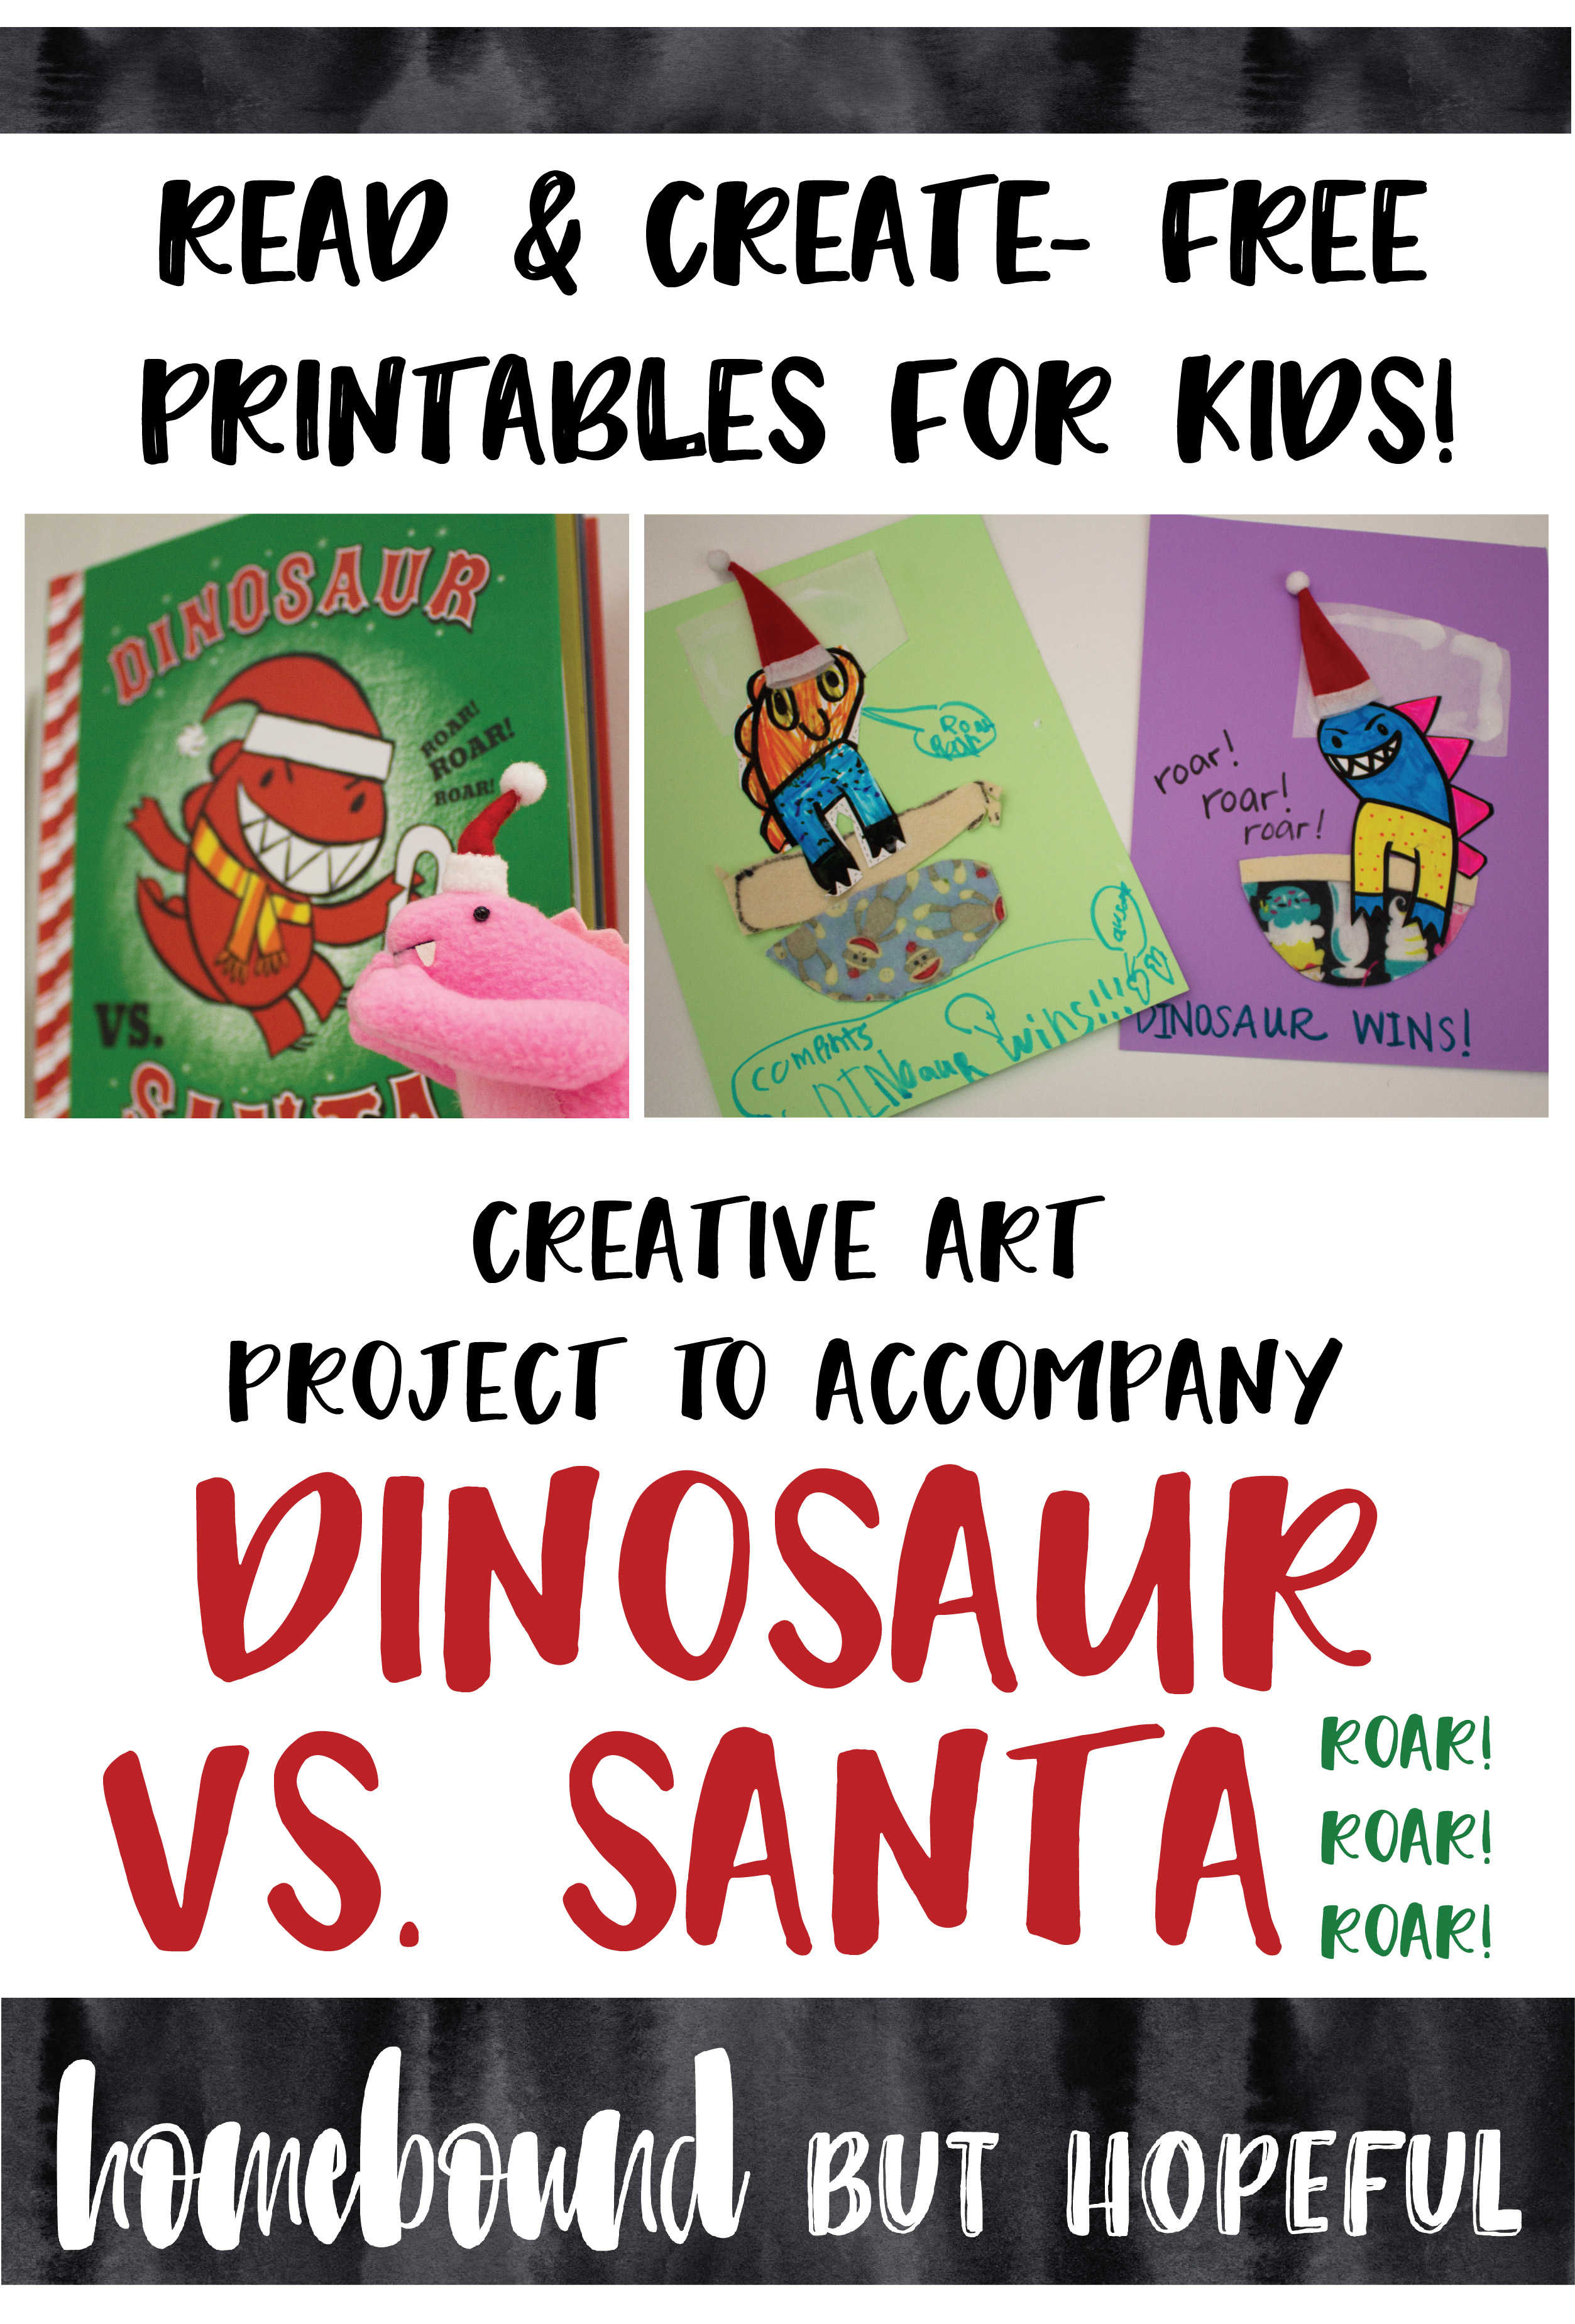 If your kids are big fans of Bob Shea's 'Dinosuar Vs.' series like mine is, they will love this cute craft I created to correspond with "Dinosaur Vs. Santa". Perfect for a mid-December project!